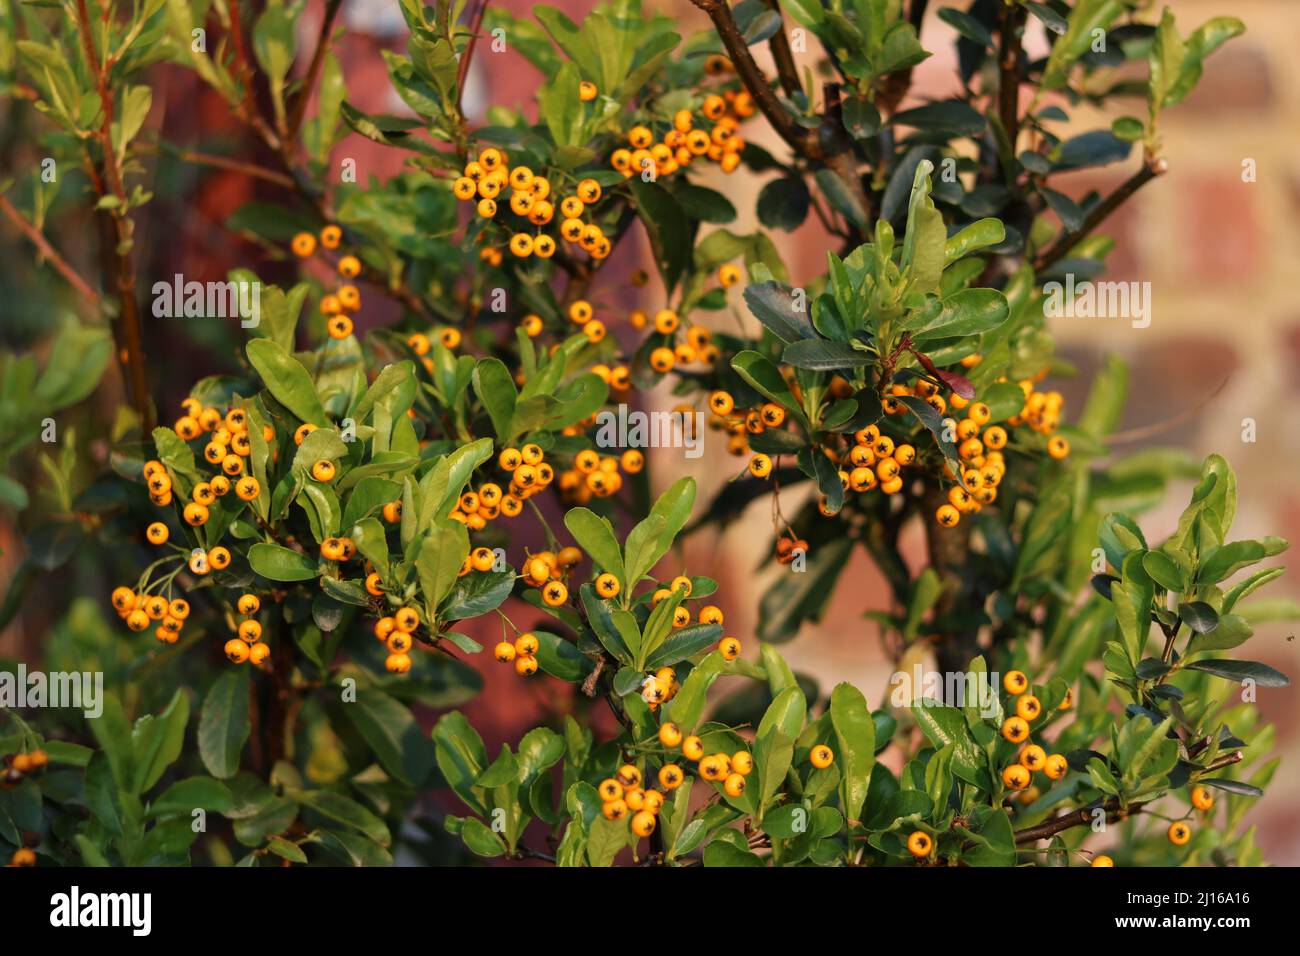 Full frame image of cotoneaster with orange berries against brick wall Stock Photo